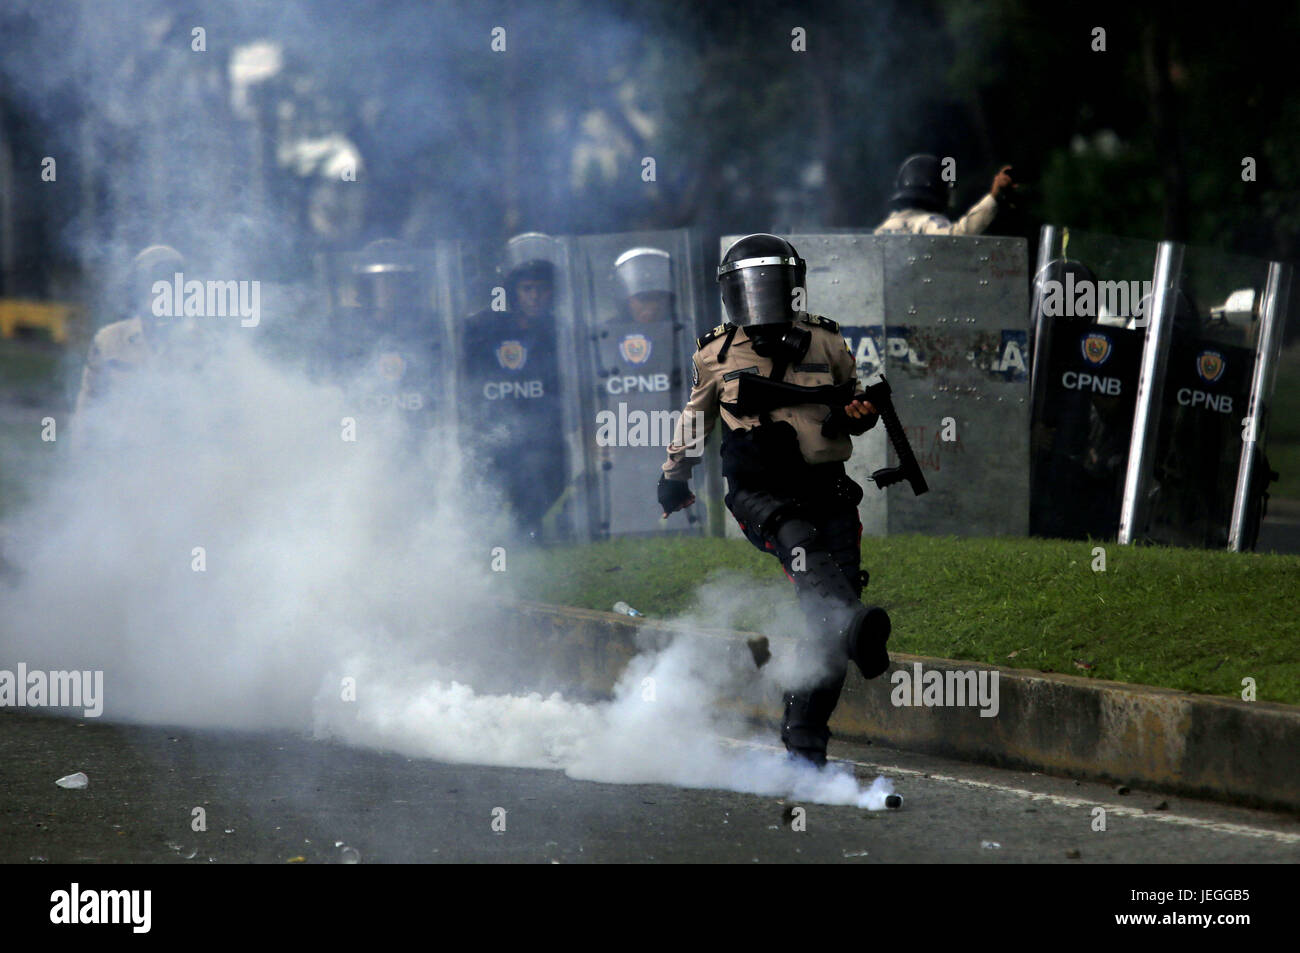 Naguanagua, Carabobo, Venezuela. 24th June, 2017. A member of the Bolivarian national police paket, kicked a lagrinogena bomb returned by the protesters, at the end of the message march to the ff a nn that was a visit to Fort Paramacay, in Naguanagua, Carabobo state. Photo: Juan Carlos Hernandez Credit: Juan Carlos Hernandez/ZUMA Wire/Alamy Live News Stock Photo